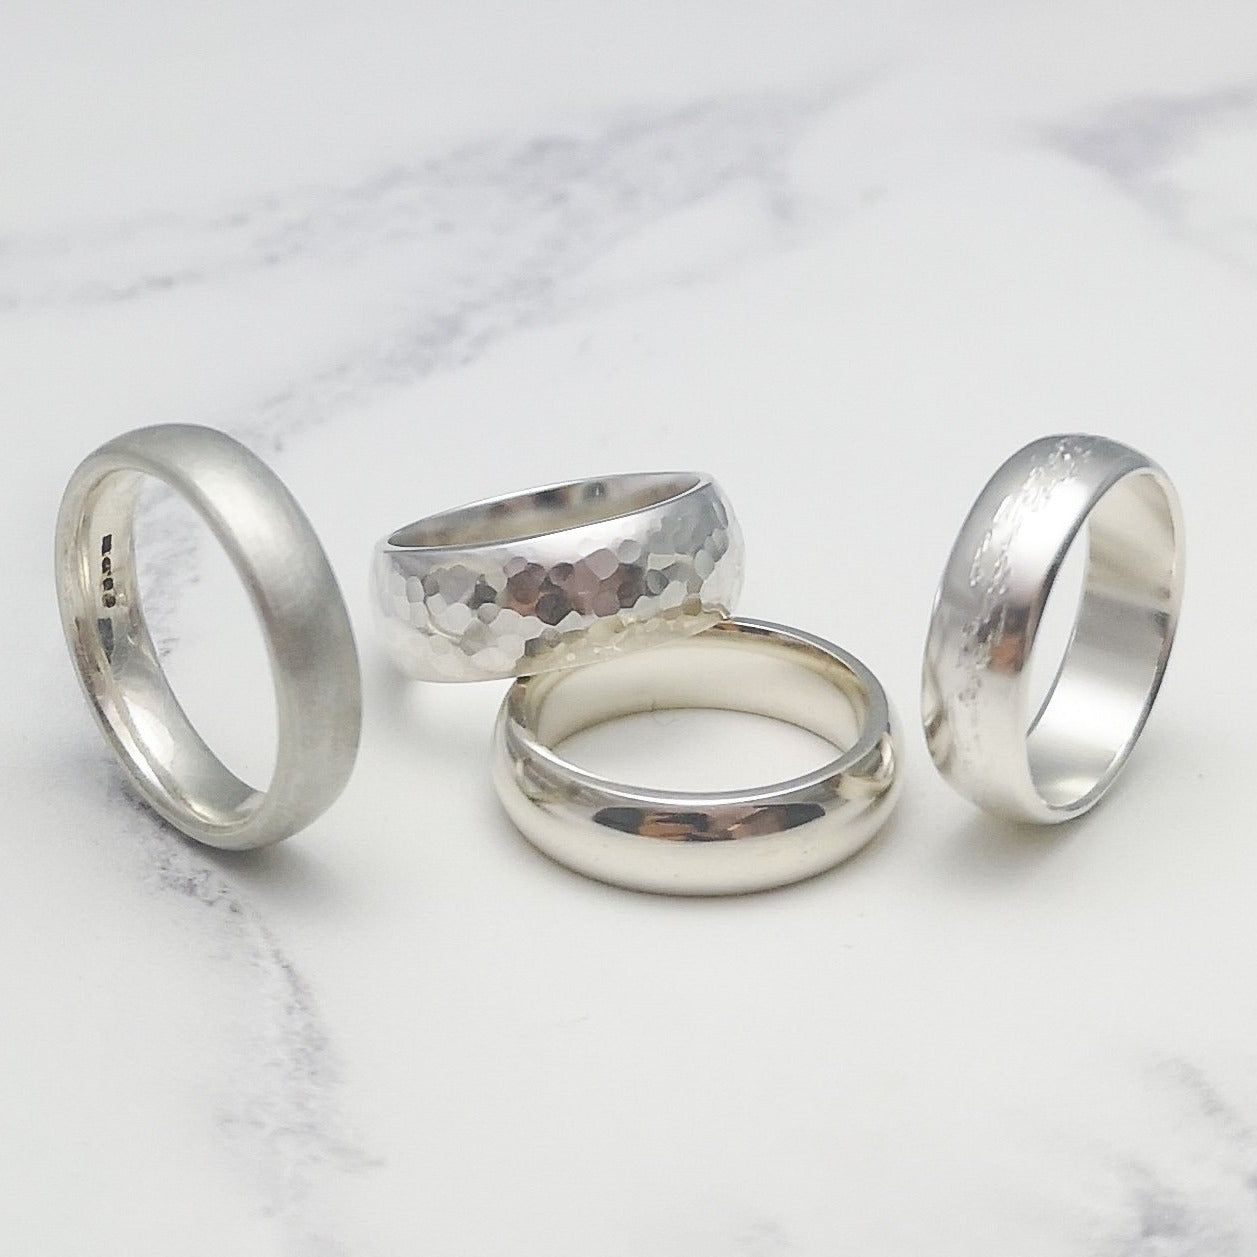 Unusual rings – project50g